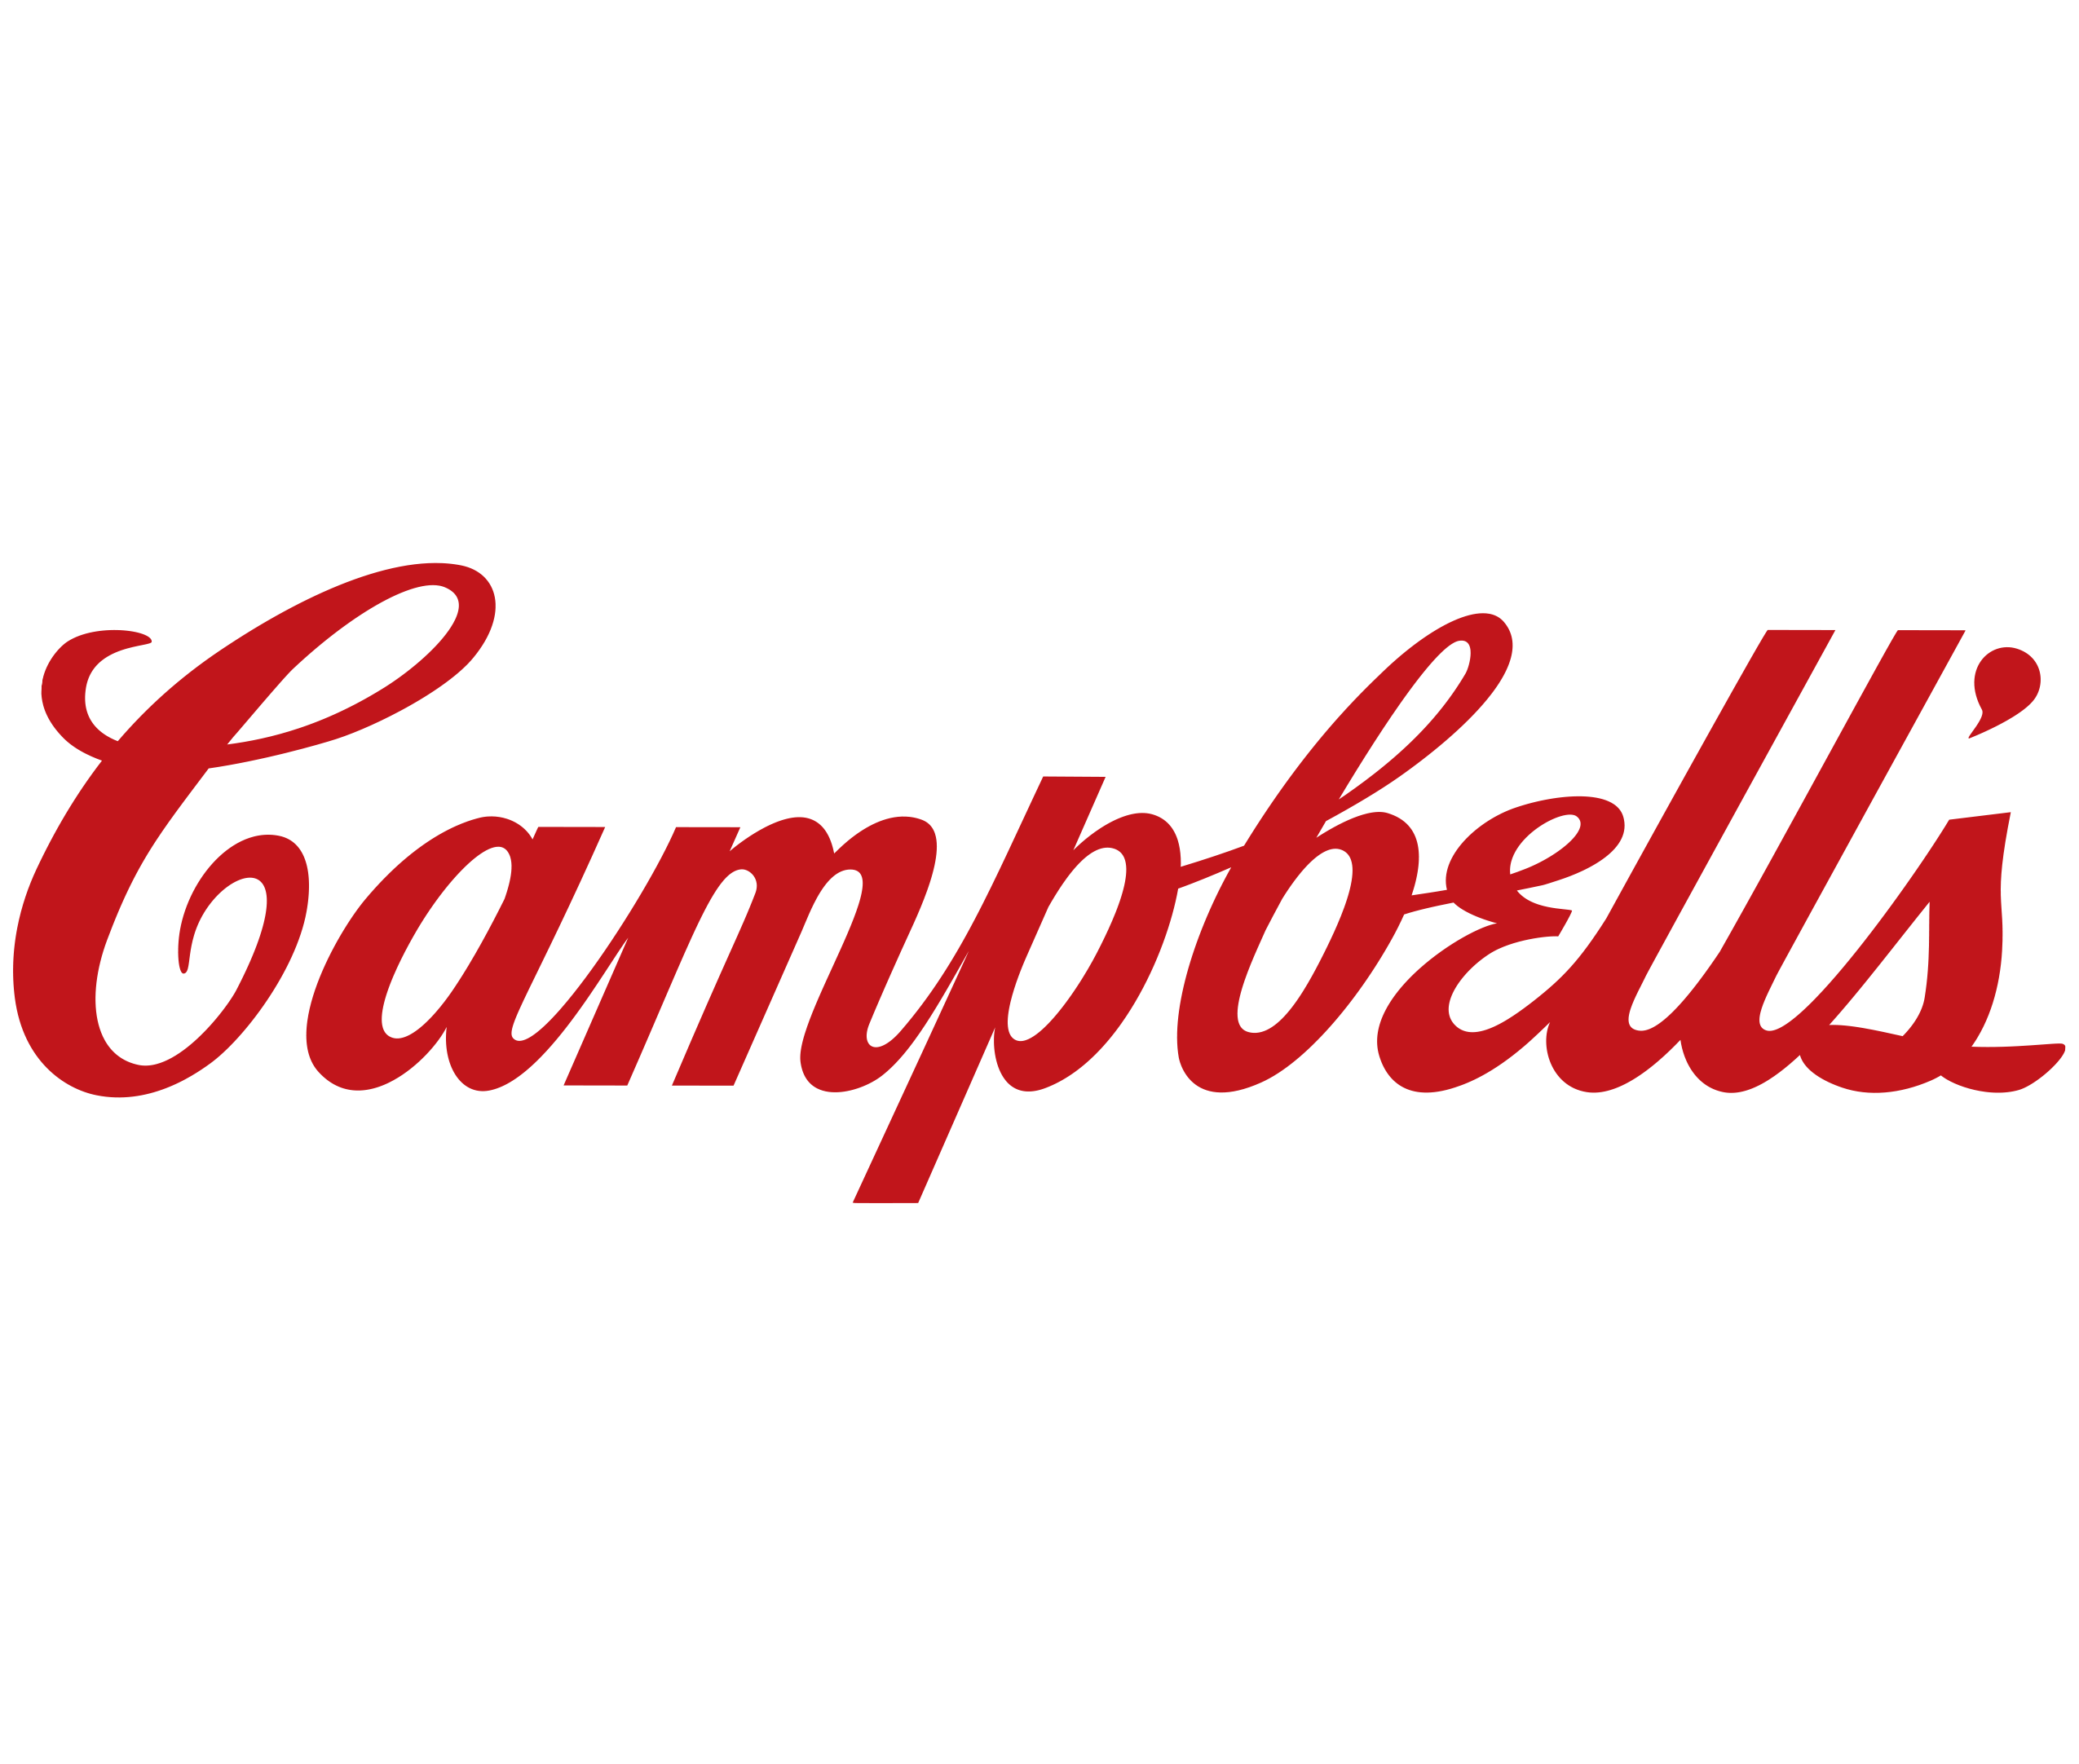 Campbell's digital foundation has made it possible for them to have a better process at product innovation.